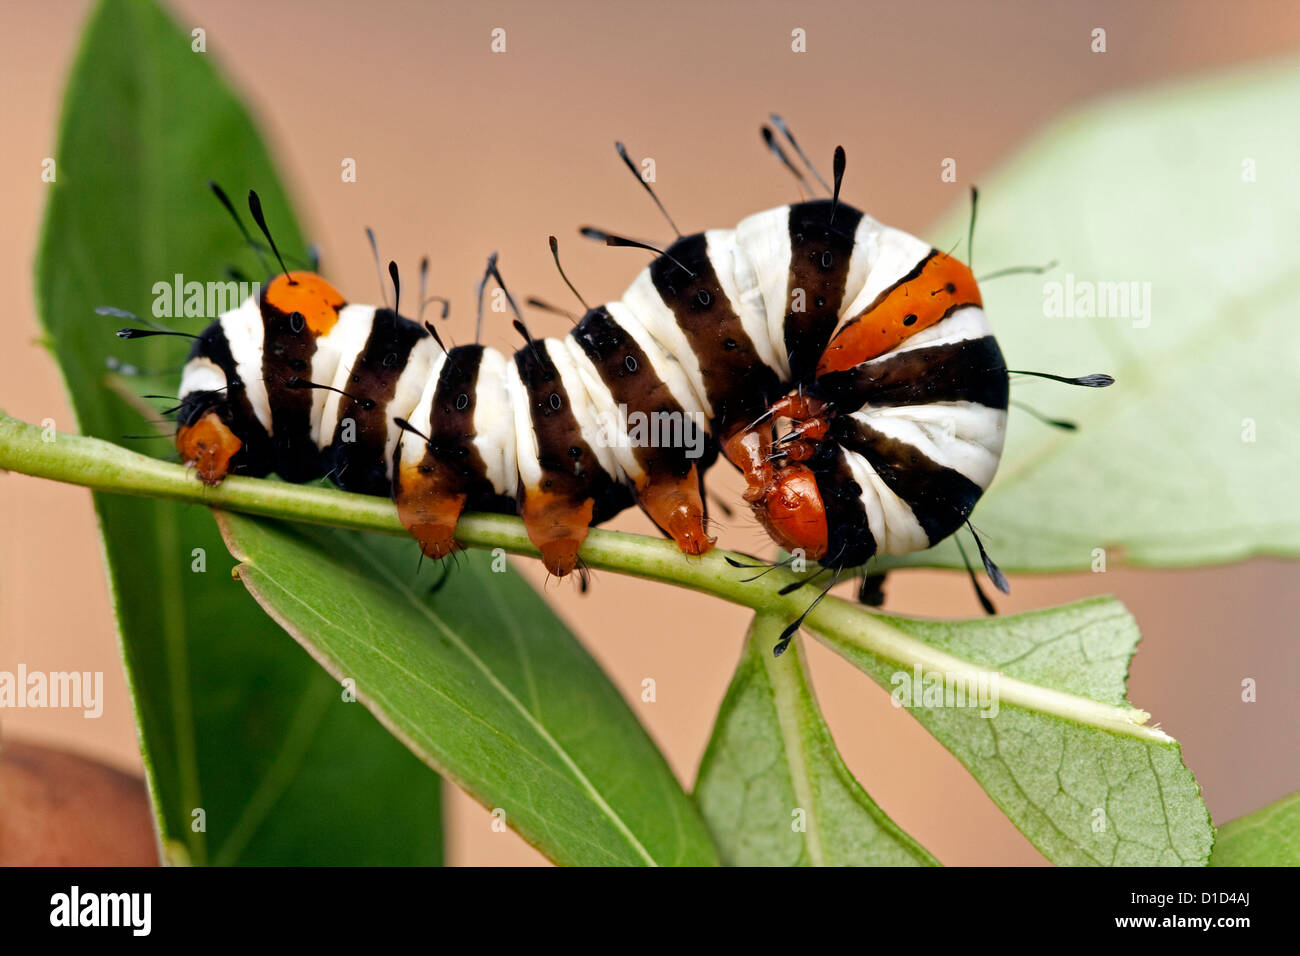 Black and white striped caterpillar of Australian painted vine moth - Agarista agricola - on green leaf Stock Photo